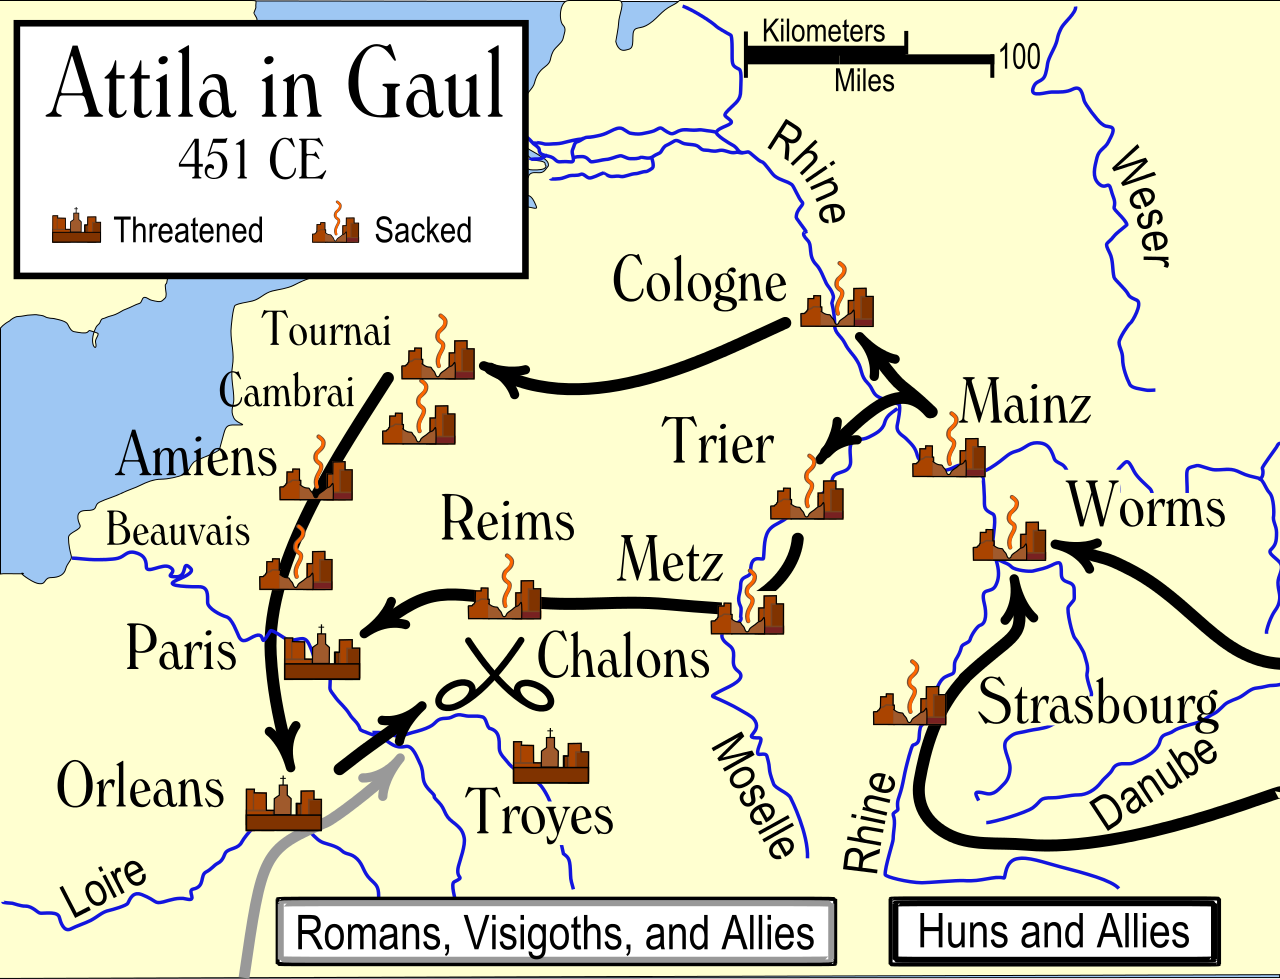 The map shows the possible routes taken by Attila's forces as they invaded Gaul, and the major cities that were sacked or threatened by the Huns and their allies